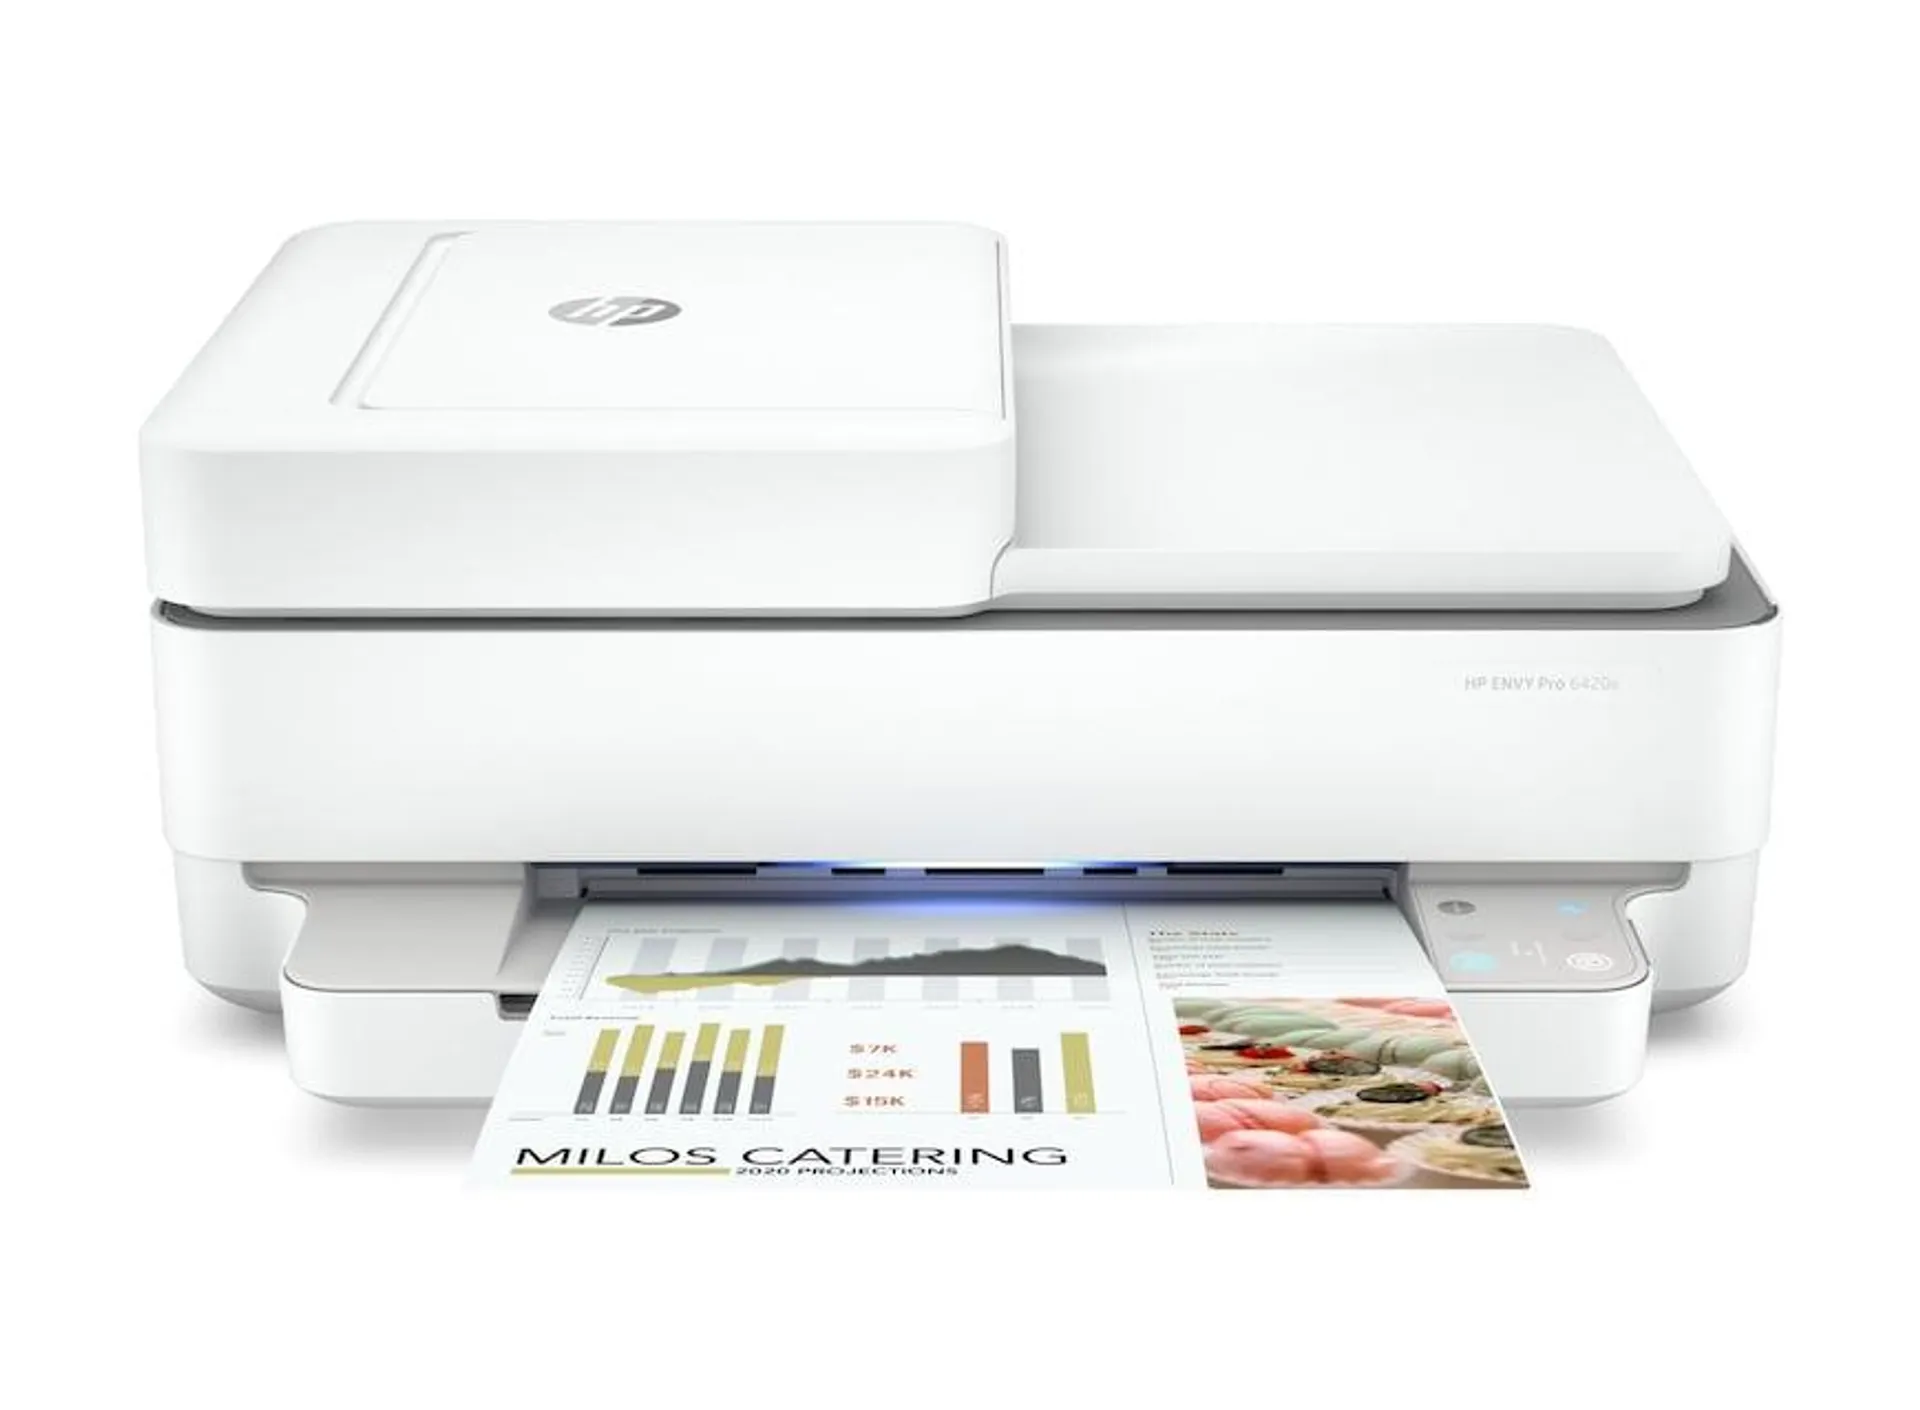 HP Envy 6420e HP+ enabled All-in-One Wireless Colour Printer with 3 months Instant Ink